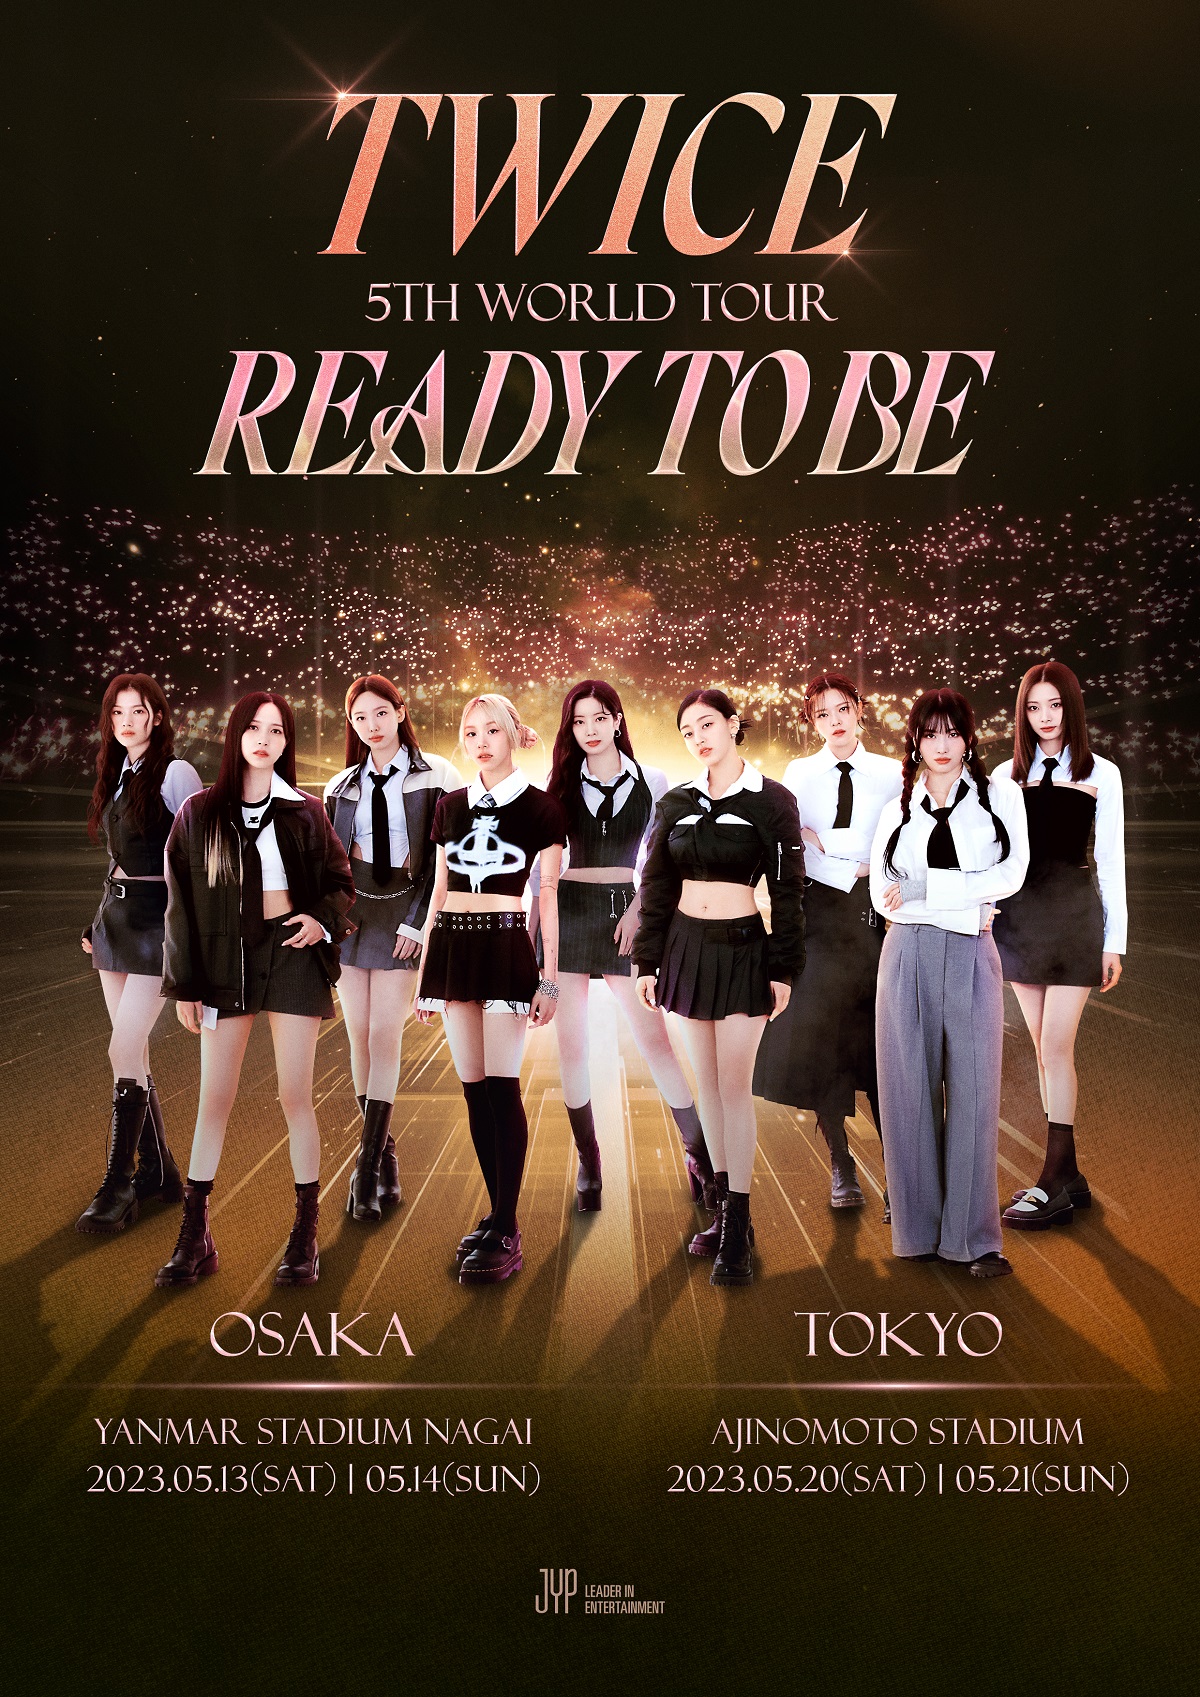 TWICE 5TH WORLD TOUR ‘READY TO BE’ in JAPAN 定価トレード ticket board